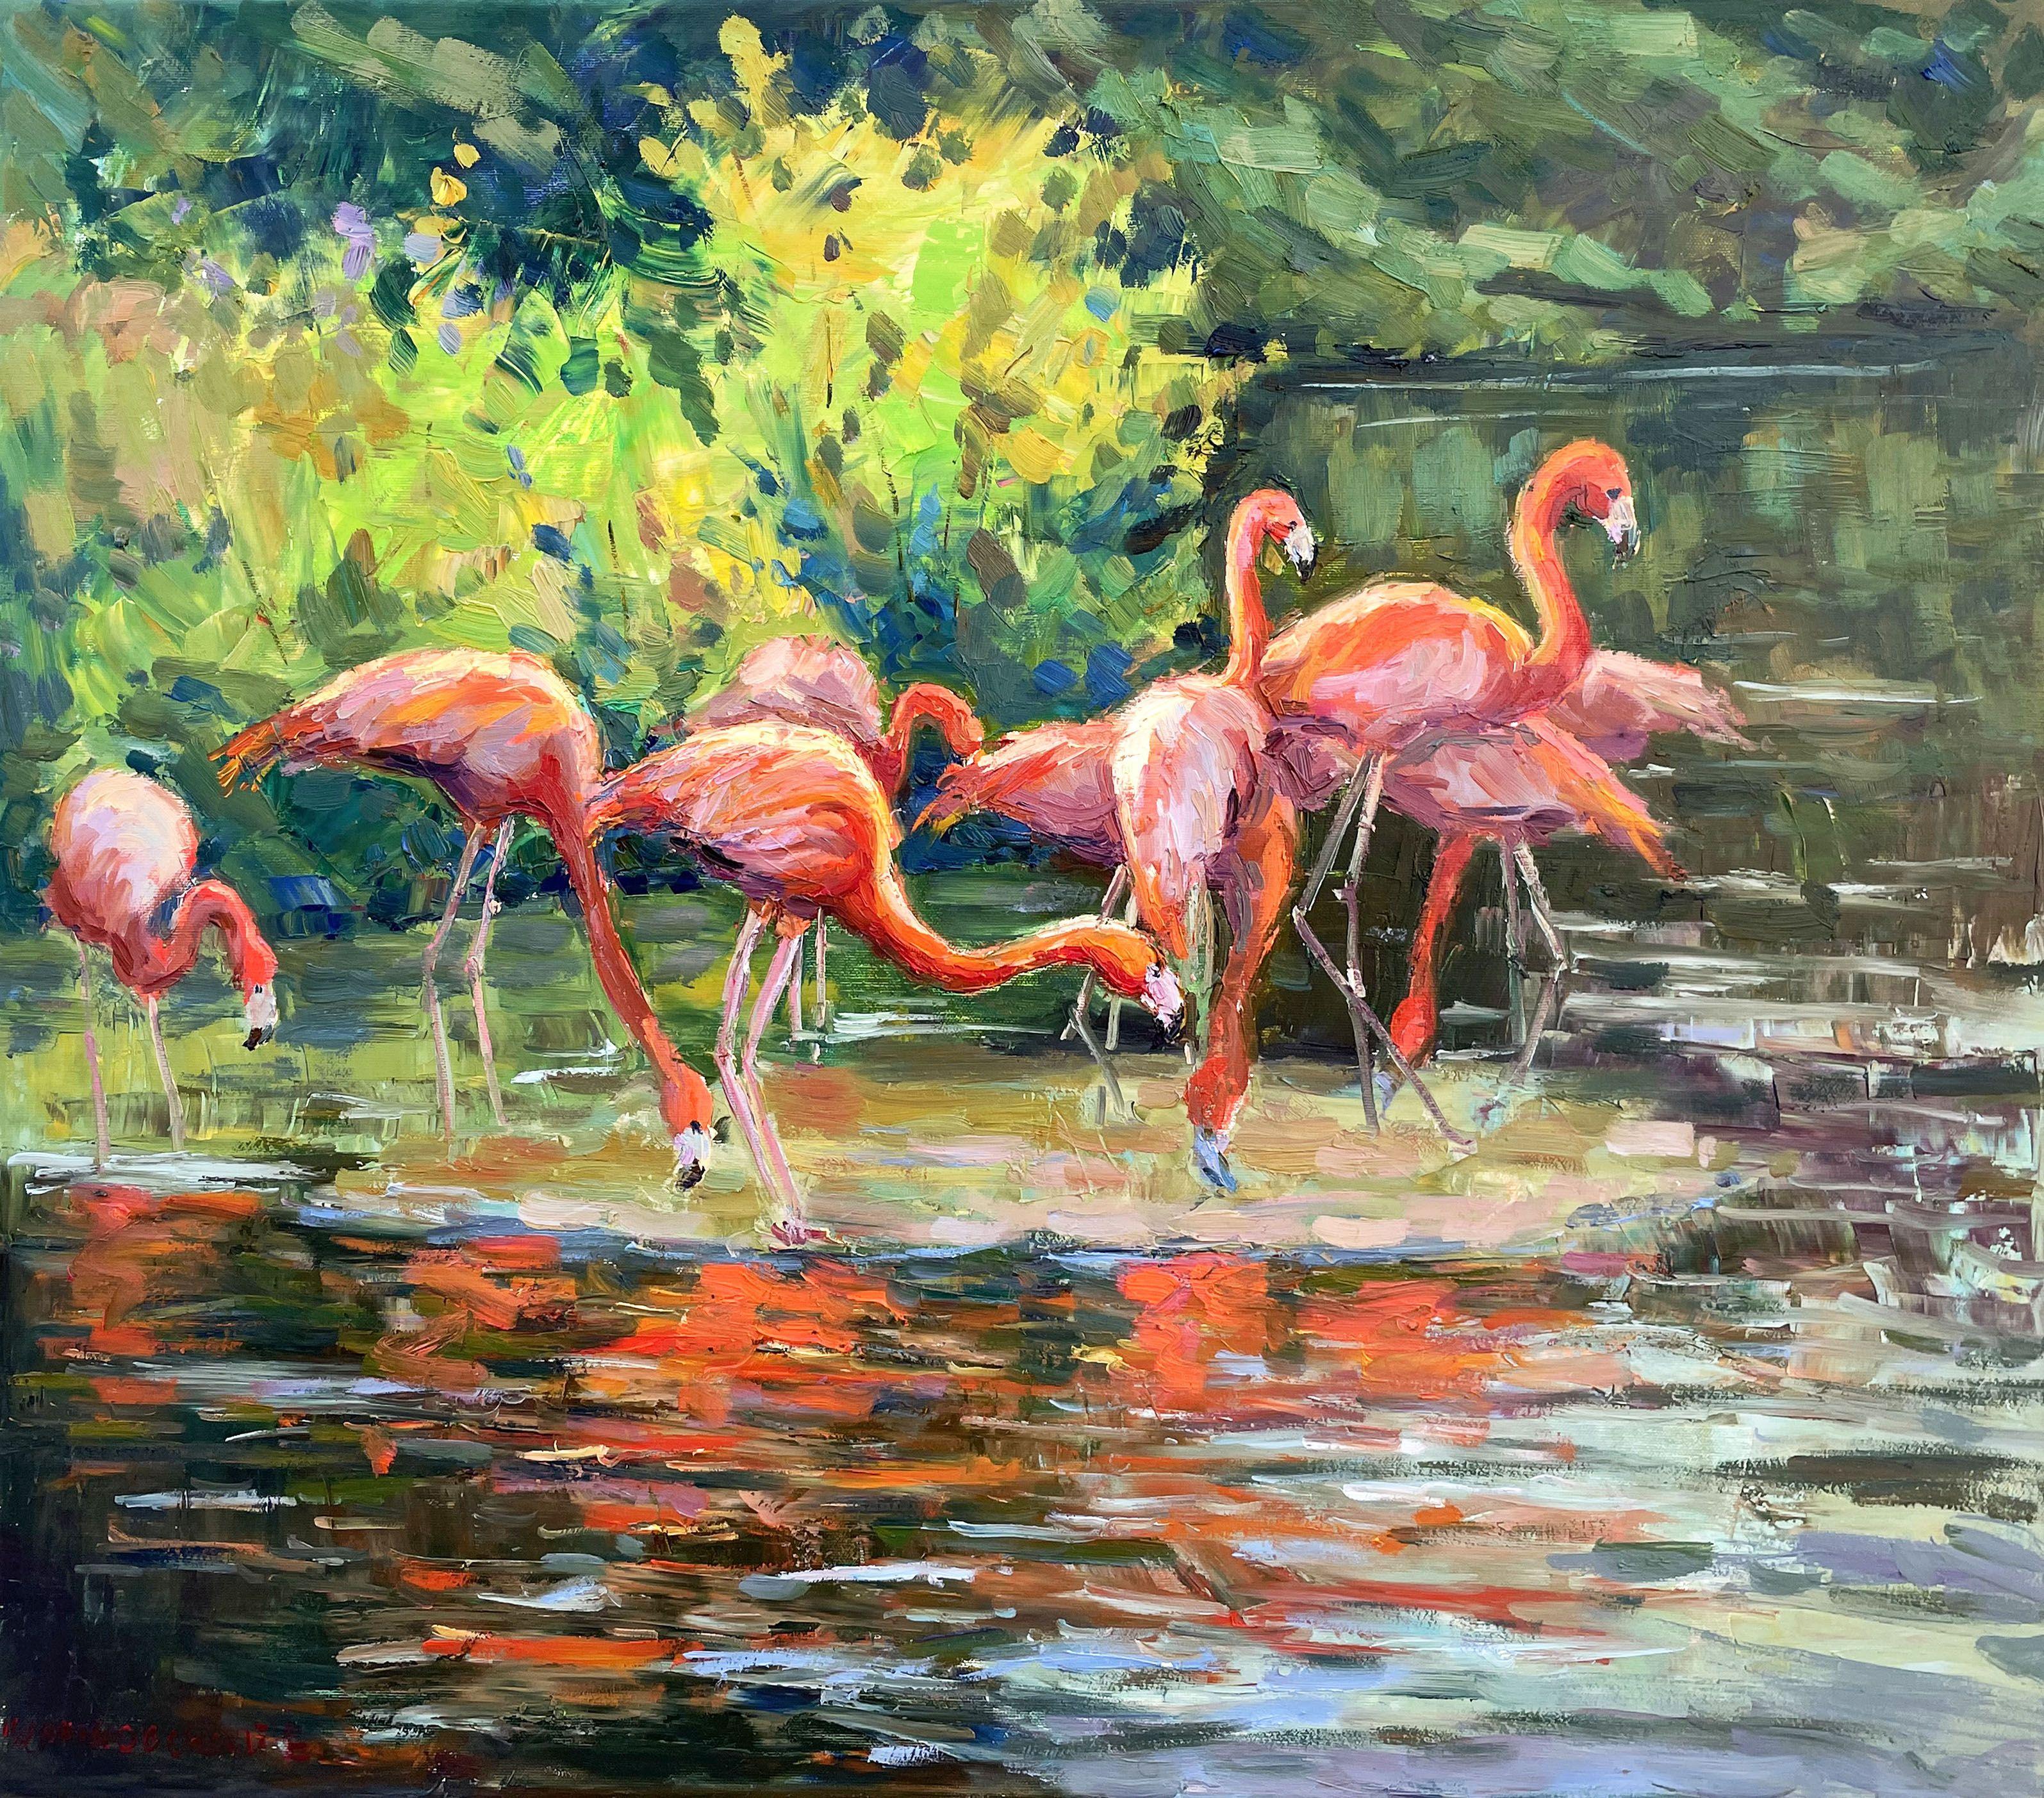 Original Oil painting by Ukrainian artist Evgeny Chernyakovsky    "Flamingo"  70.0 X 80.0 CM / 27.5 X 31.4 IN  HIGH QUALITY oil on canvas  Signed on the front and back  Dated 2023  Good condition  GUARANTEE OF AUTHENTICITY   :: Painting ::